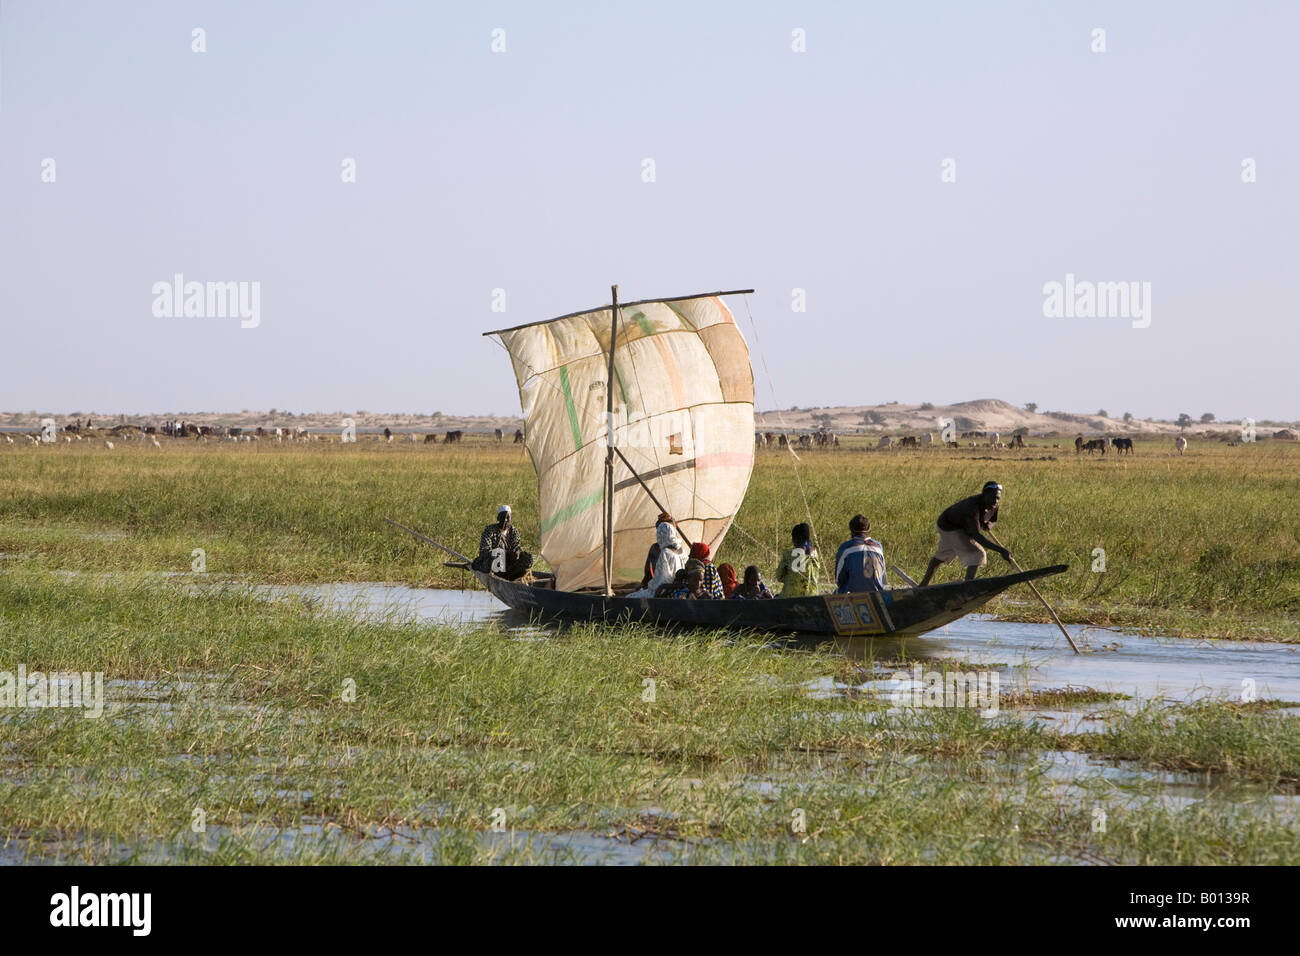 Mali, Niger Inland Delta. Helped by a crude sail, a boatman poles a pirogue full of passengers through a grassy channel. Stock Photo